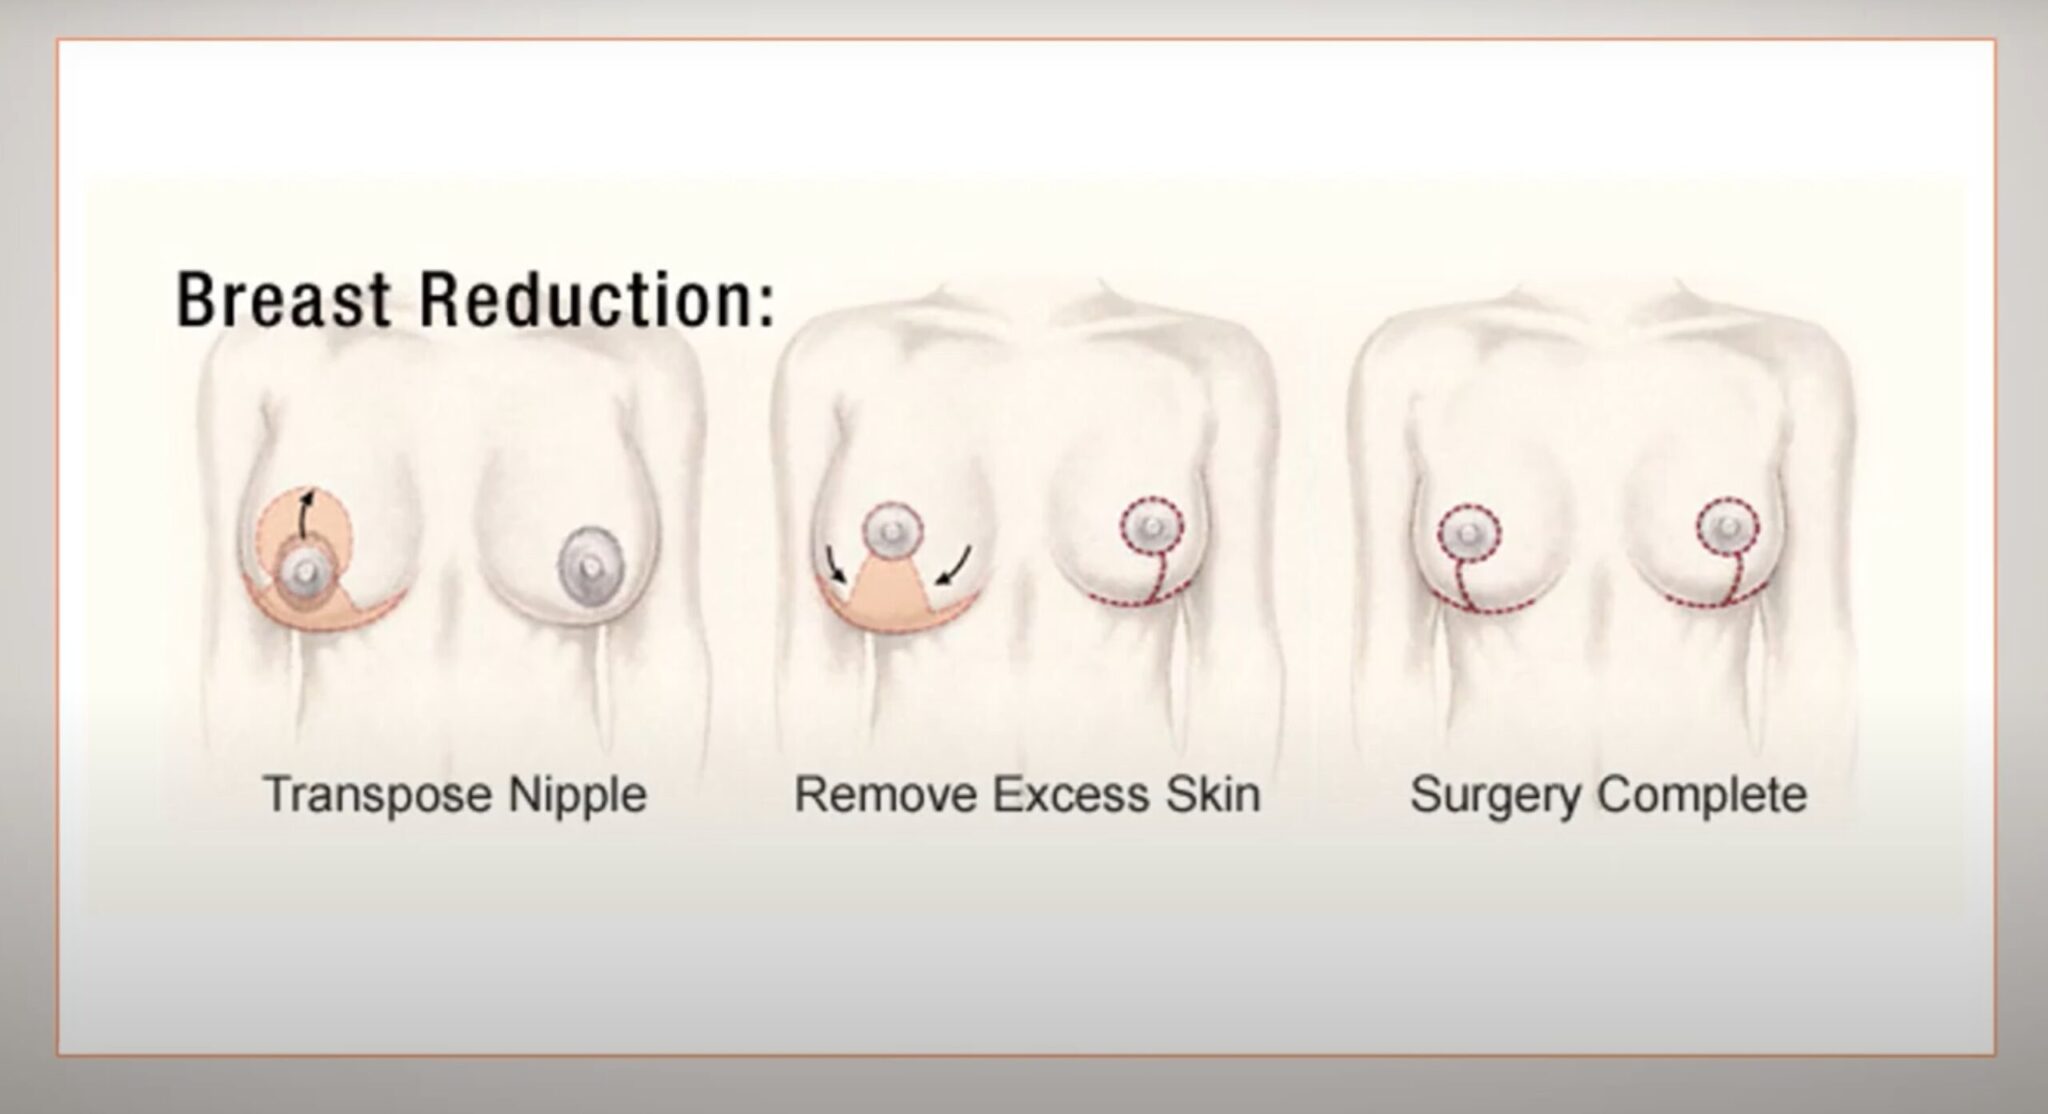 Breast Reduction Surgery can change everything in a day! - Plastic